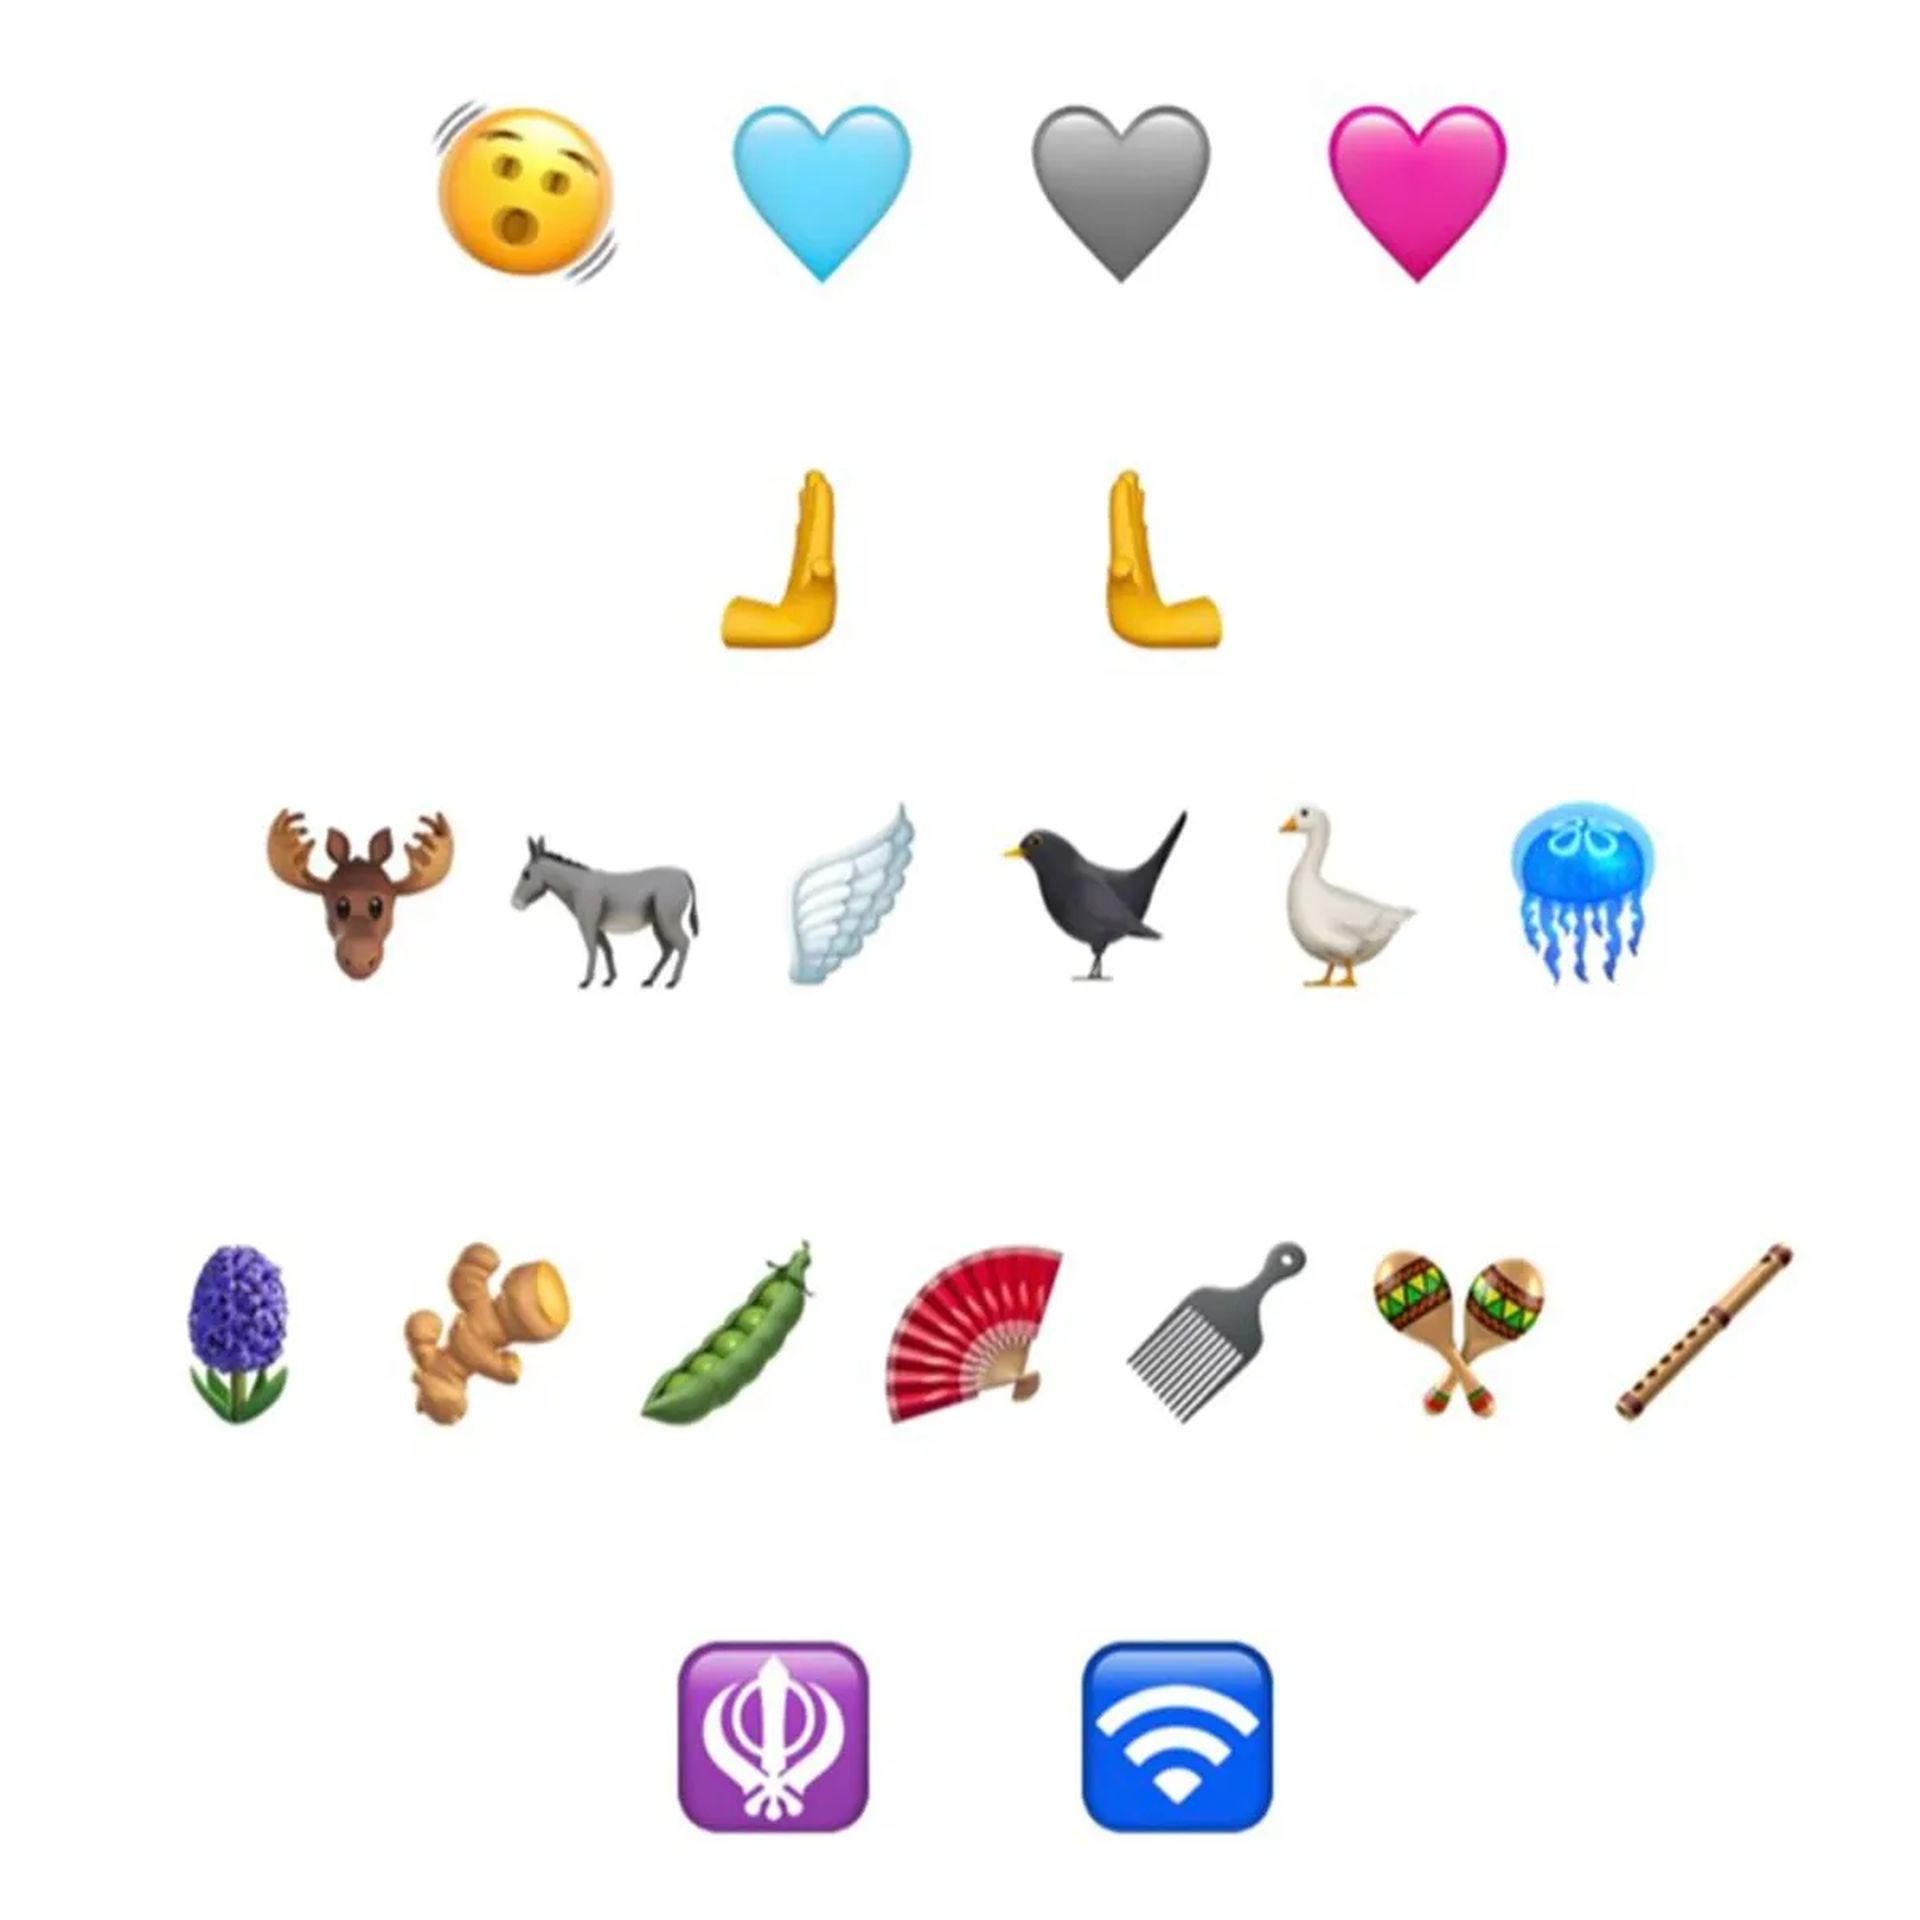 In this article, we'll be taking a look at the iOS 16.4 new emojis that are going to be added in the latest update. According to Emojipedia, the first iOS...